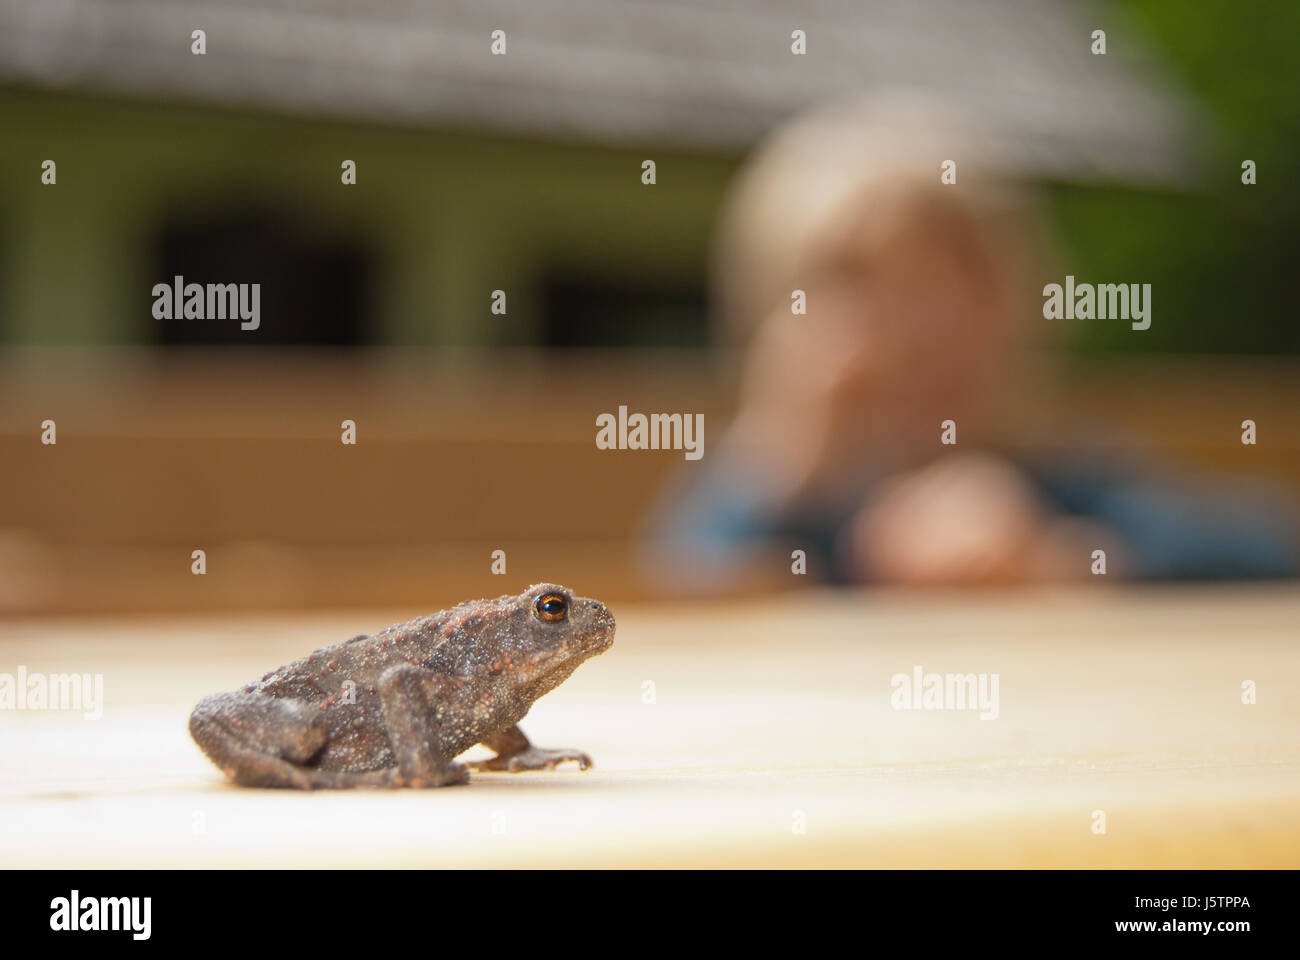 Common toad (Bufo bufo) newly metamorphosed juvenile with a child in the blurred background. Stock Photo